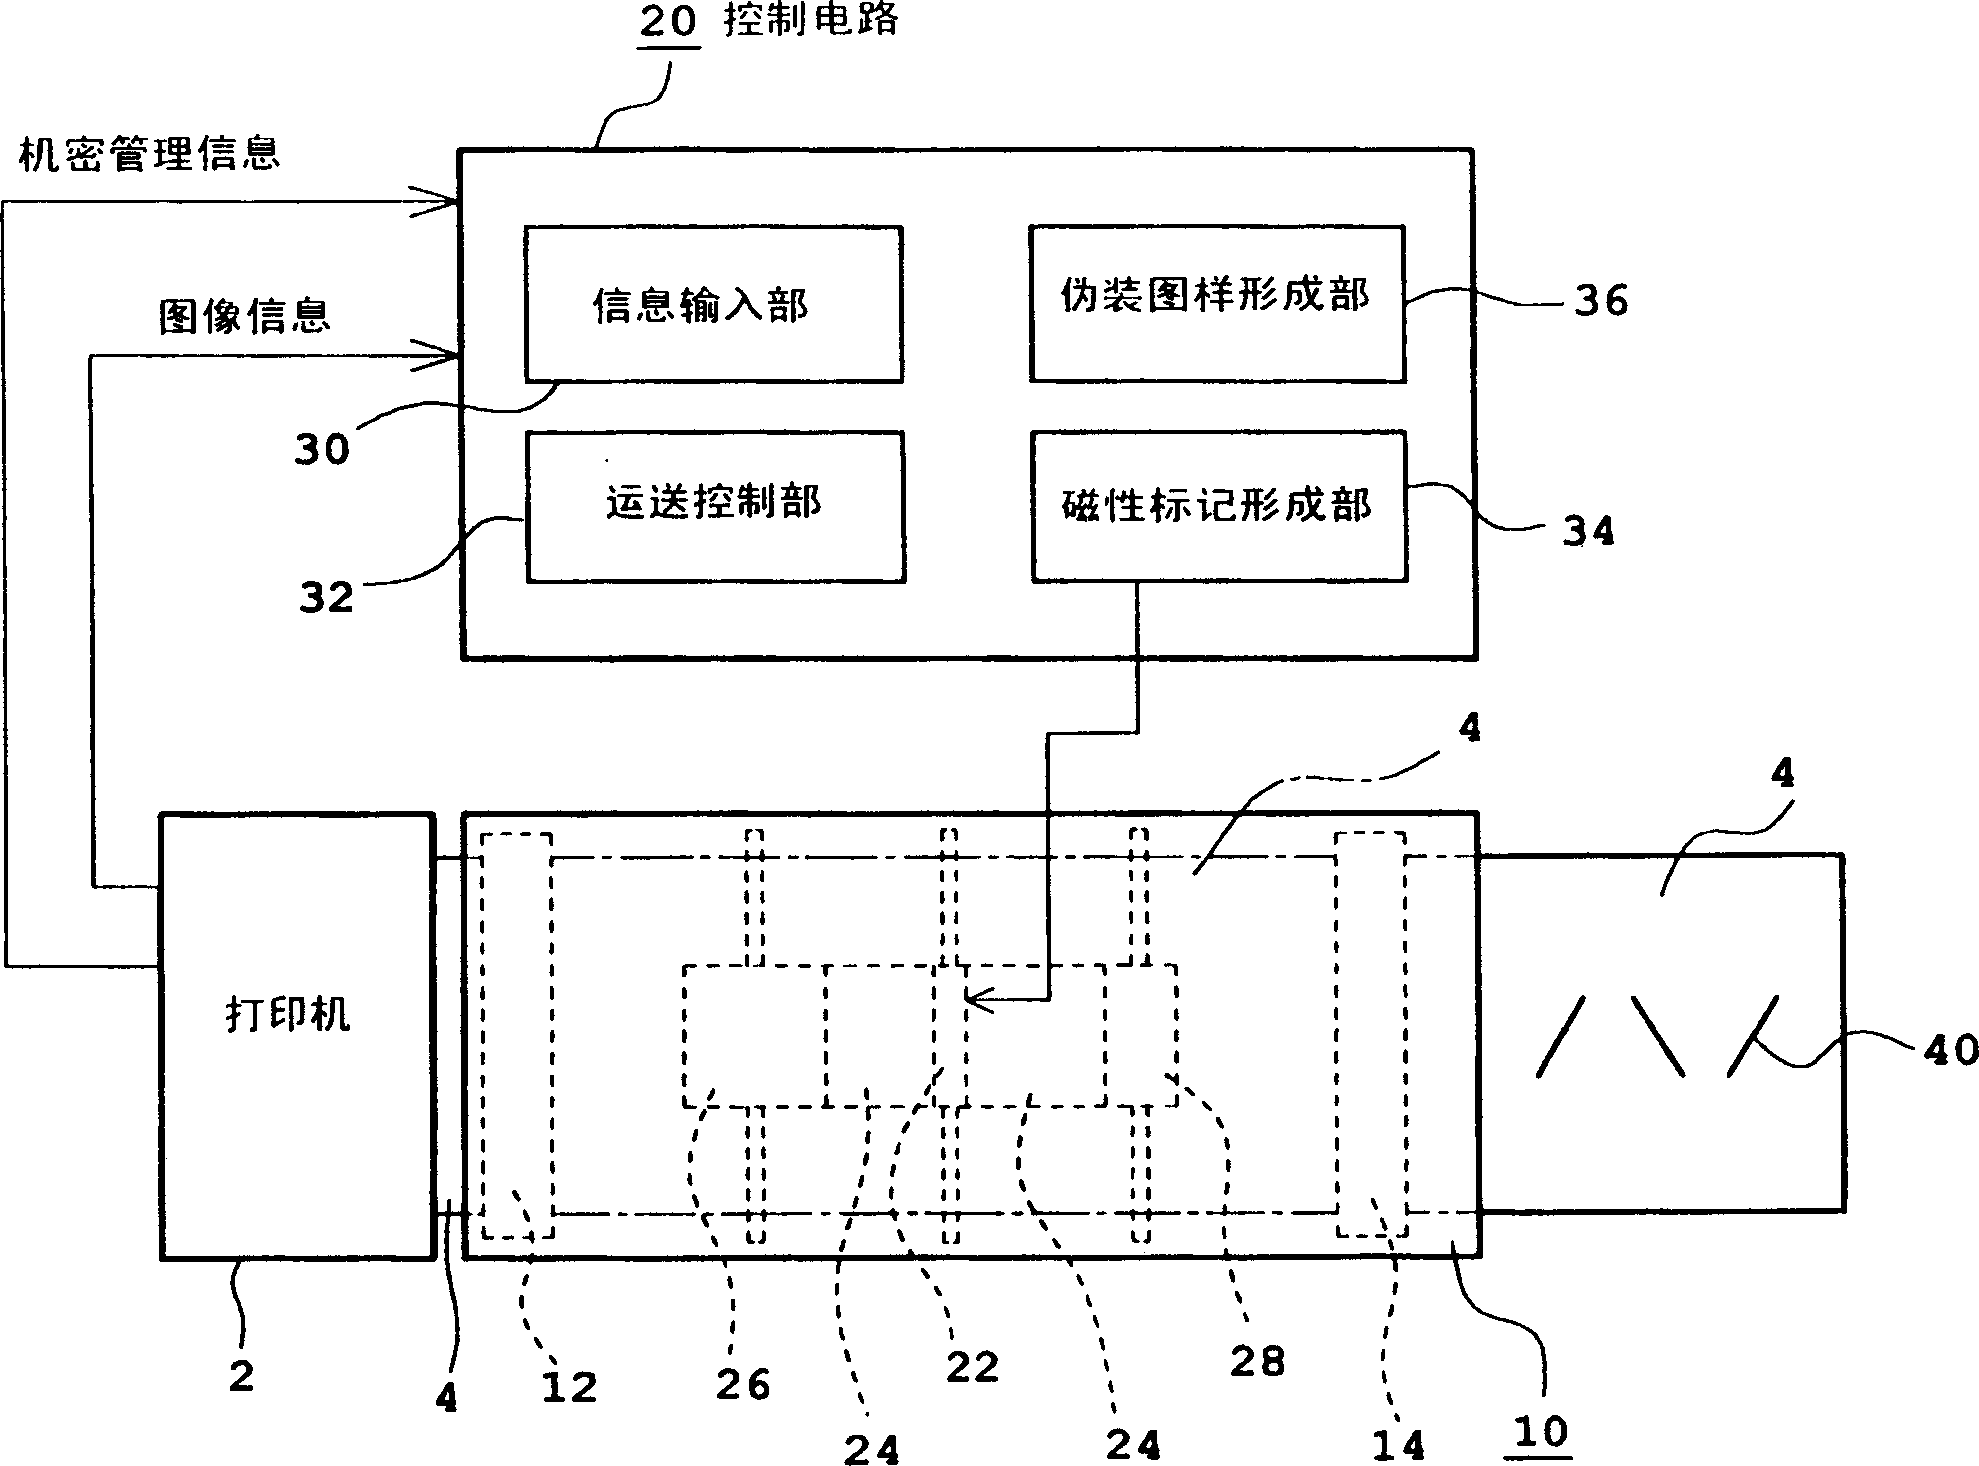 Device and method for recovding auxiliary information on print media, and image formation device